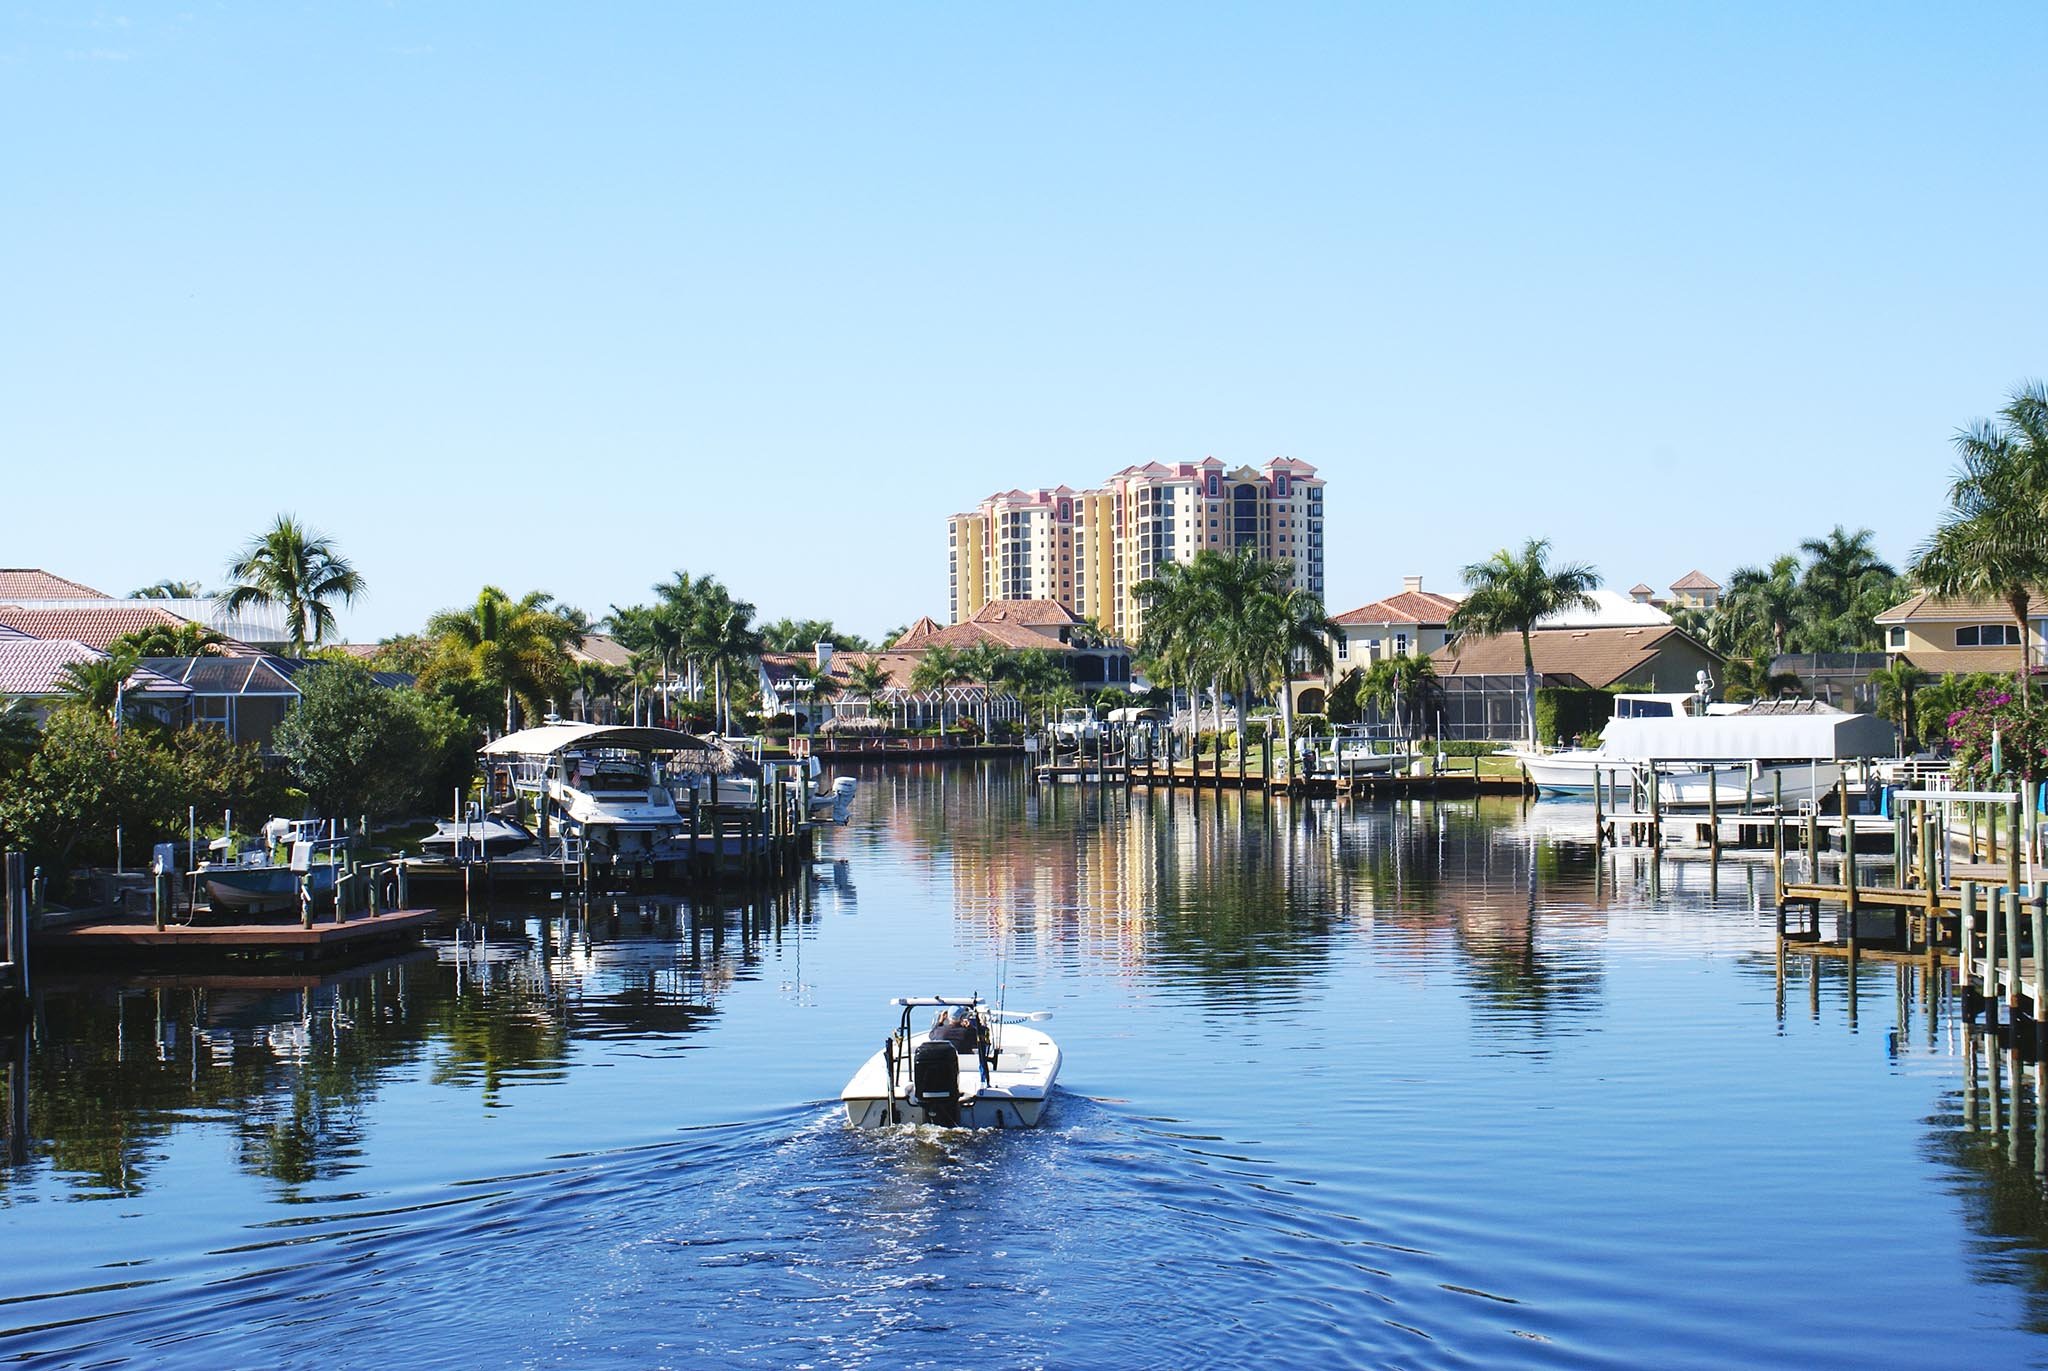 SEARCH FOR HOMES IN CAPE CORAL, FL AND SURROUNDING AREAS